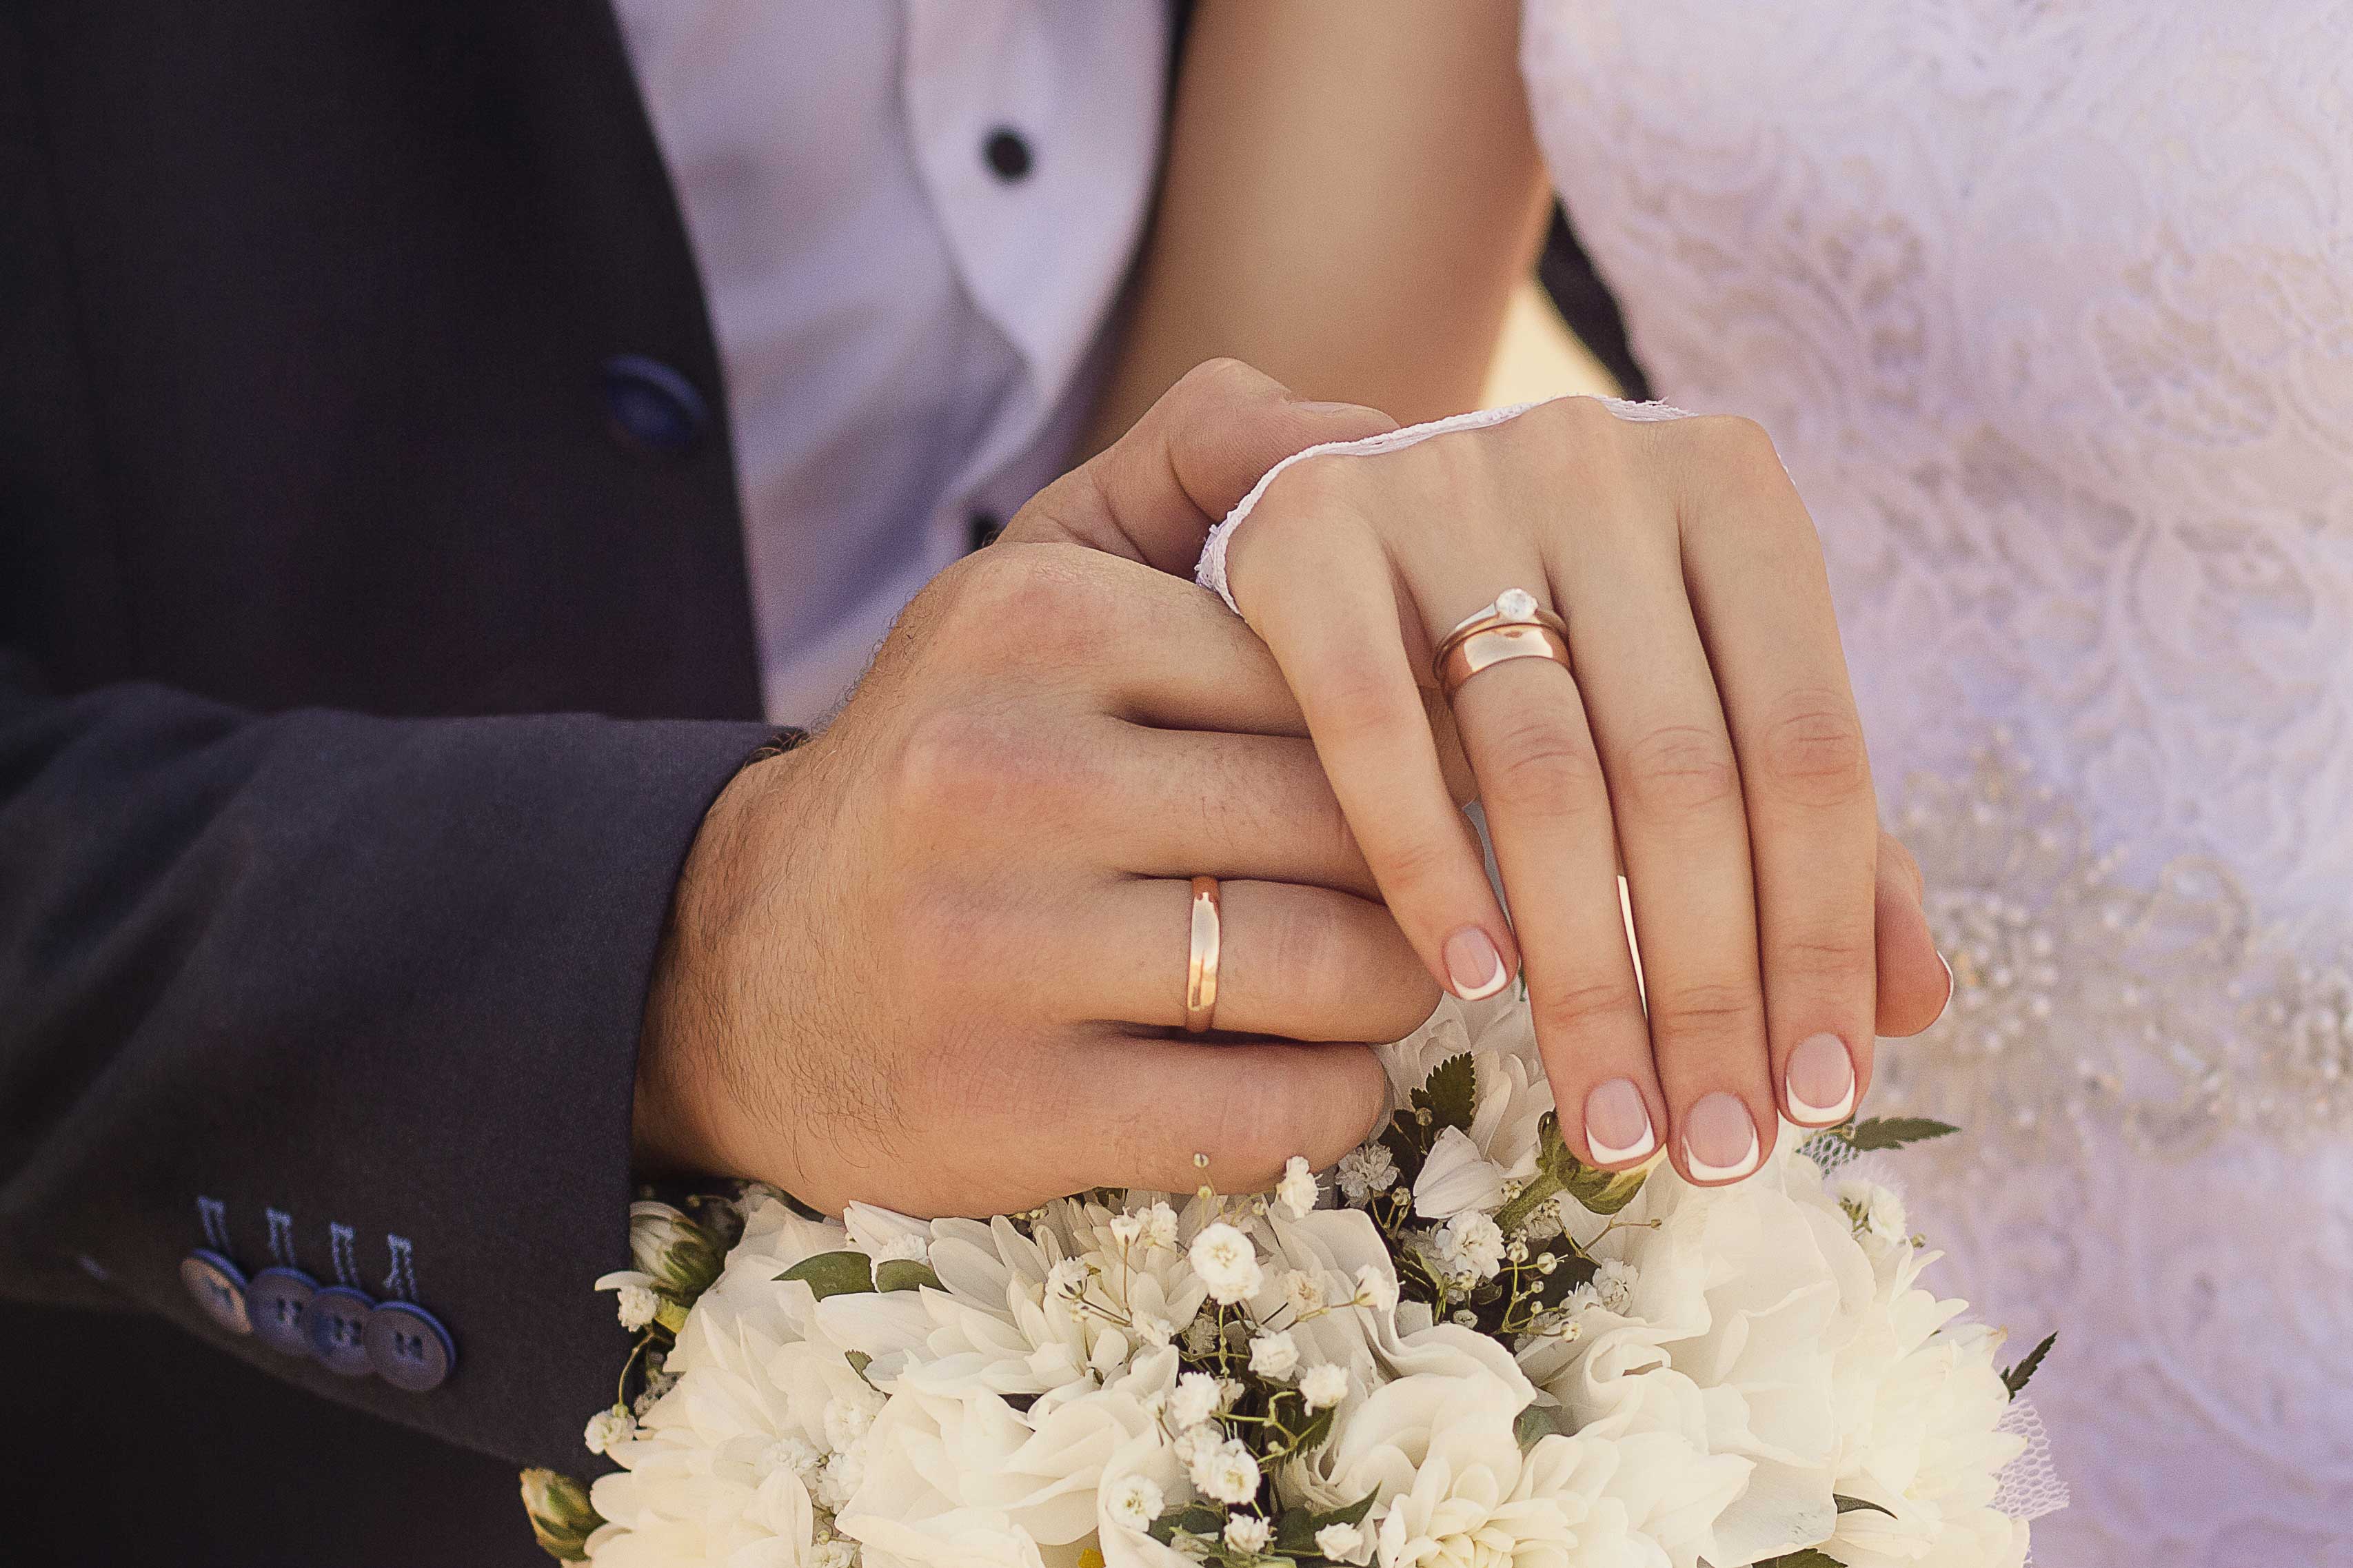 zoom on the hands of newlyweds with their wedding rings